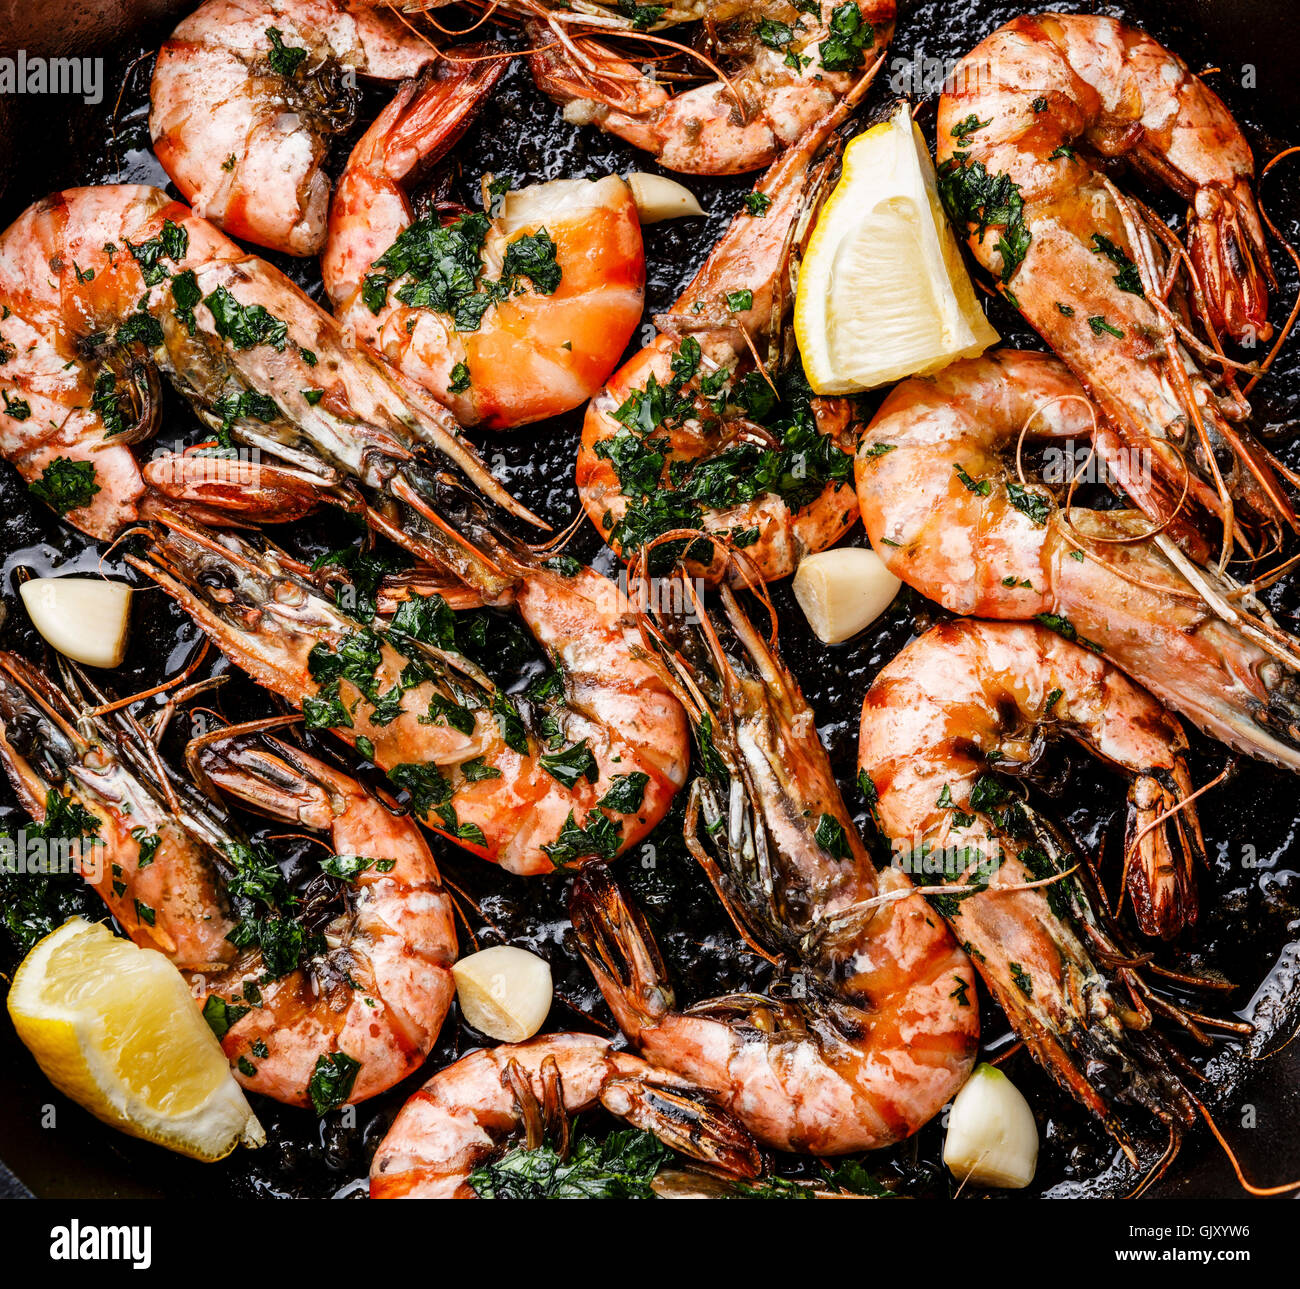 Tiger prawns roasted on frying pan with green sauce close up Stock Photo